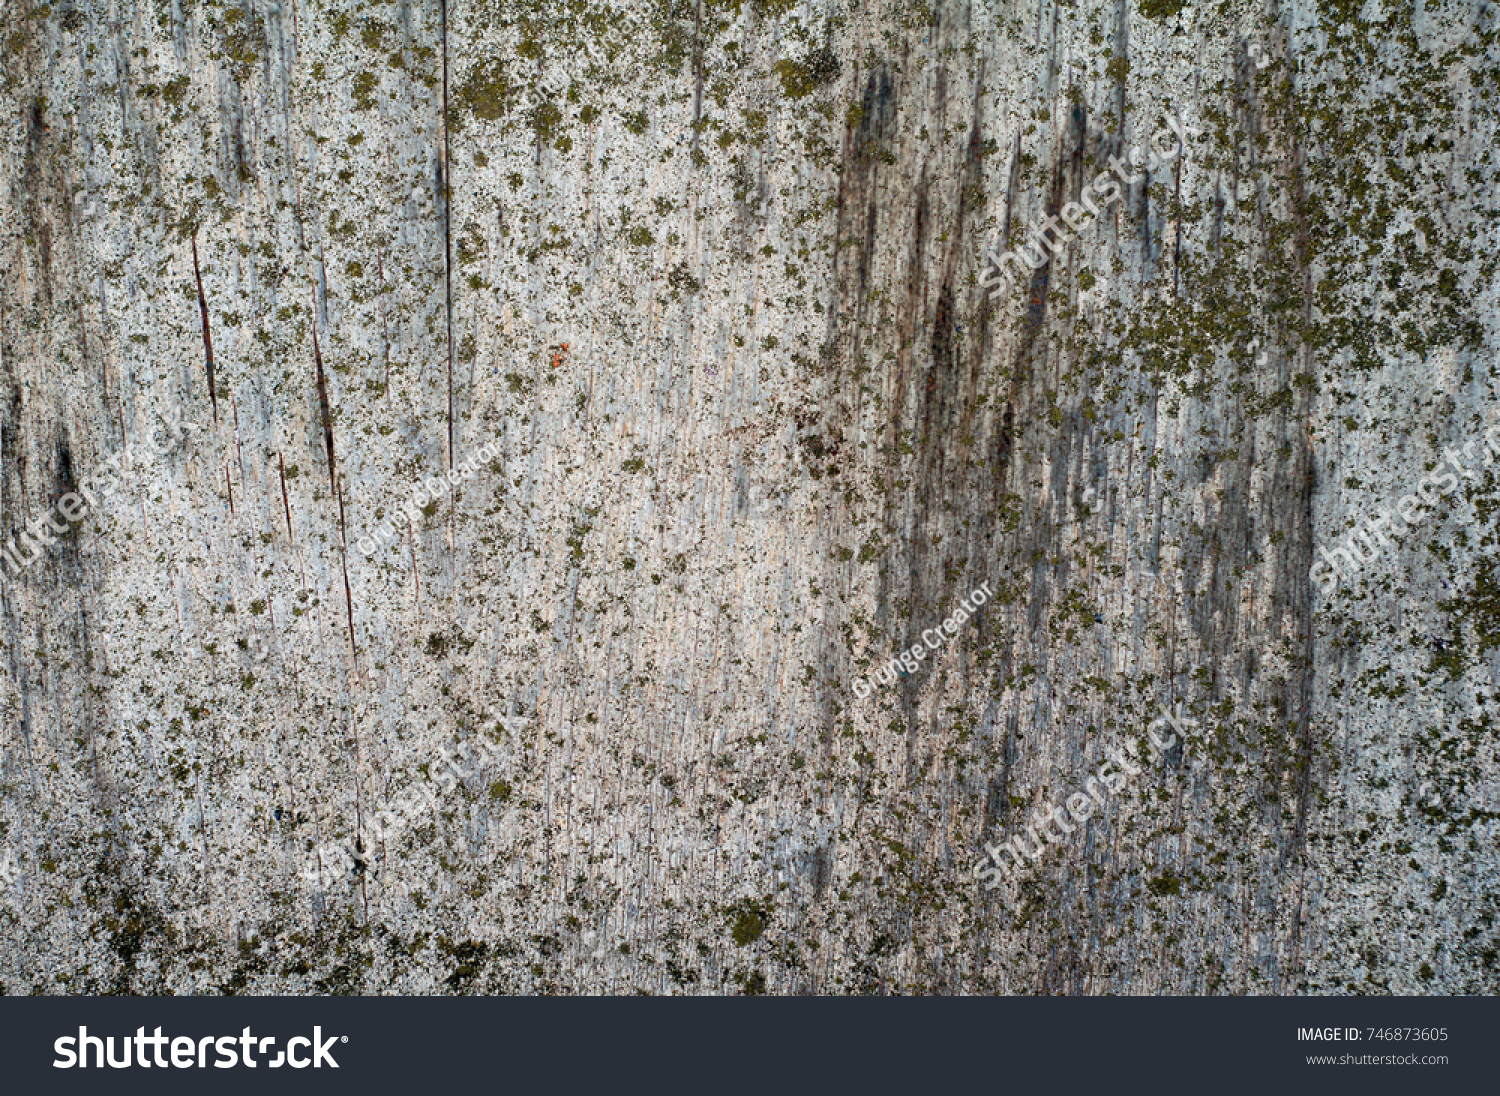 Abstract multicolor grunge background with abstract colored texture. Various color pattern elements. Old  vintage scratches, stain, paint splats, brush strokes, dots, spots. Weathered wall backdrop #746873605